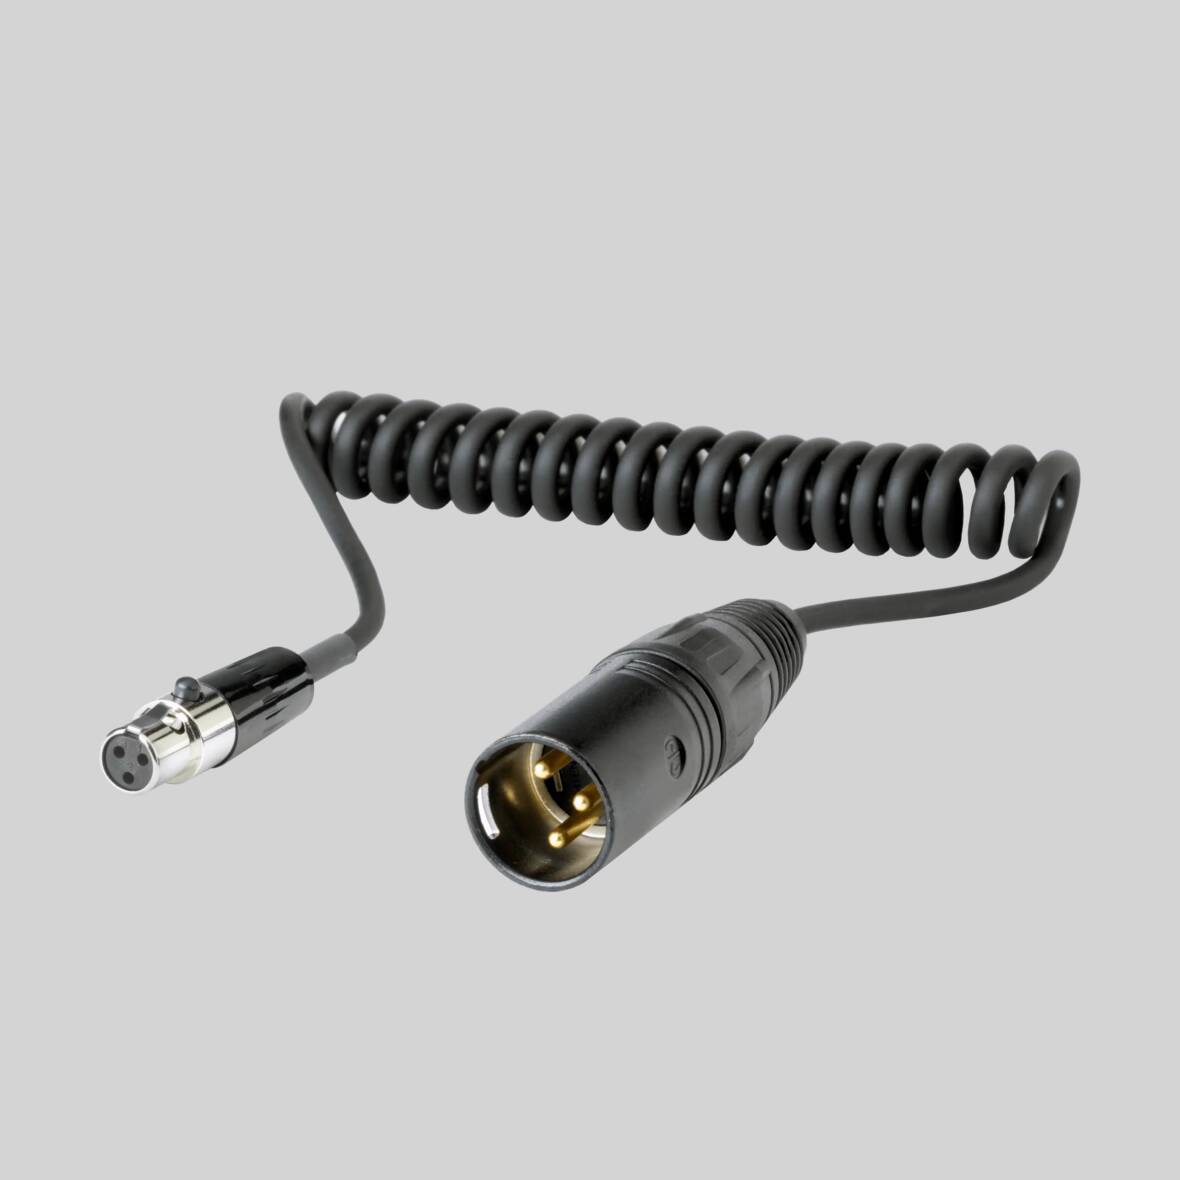 Learn more about XLR connector